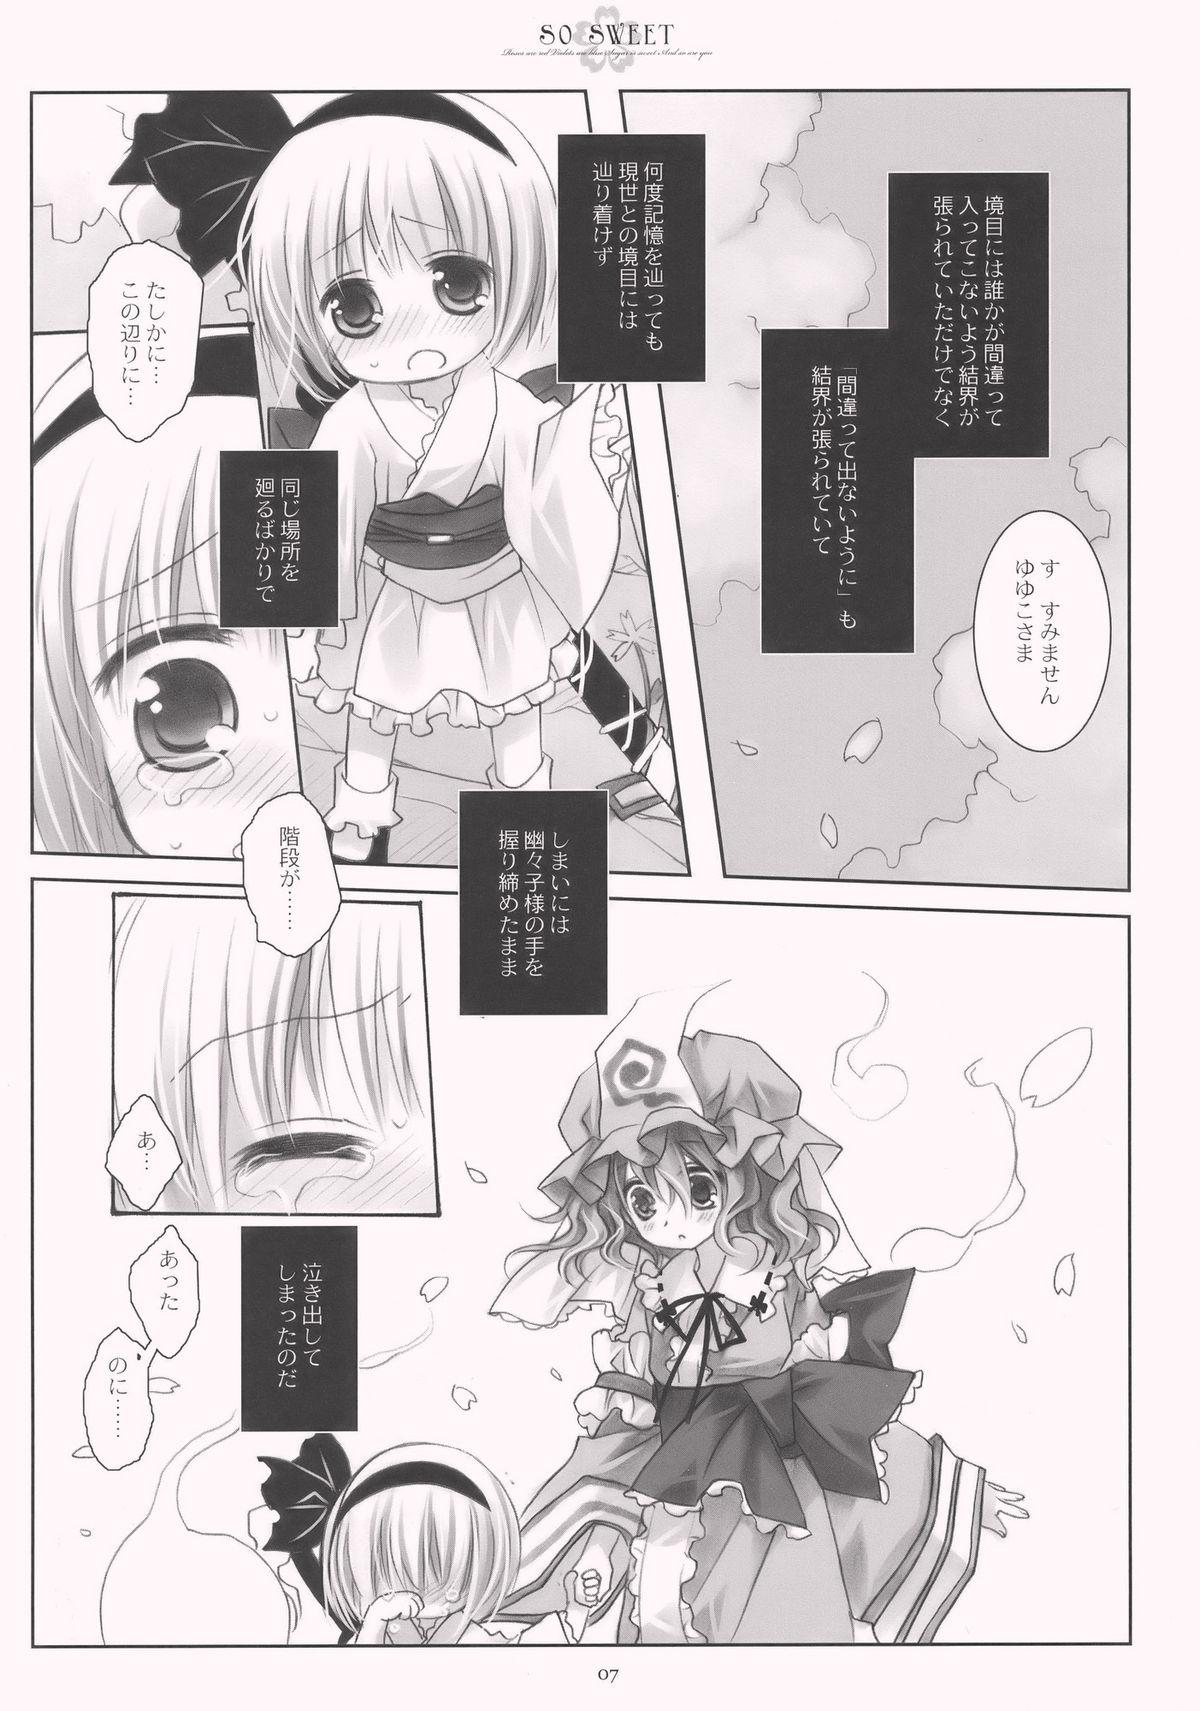 Hot SO SWEET - Touhou project Rebolando - Page 7